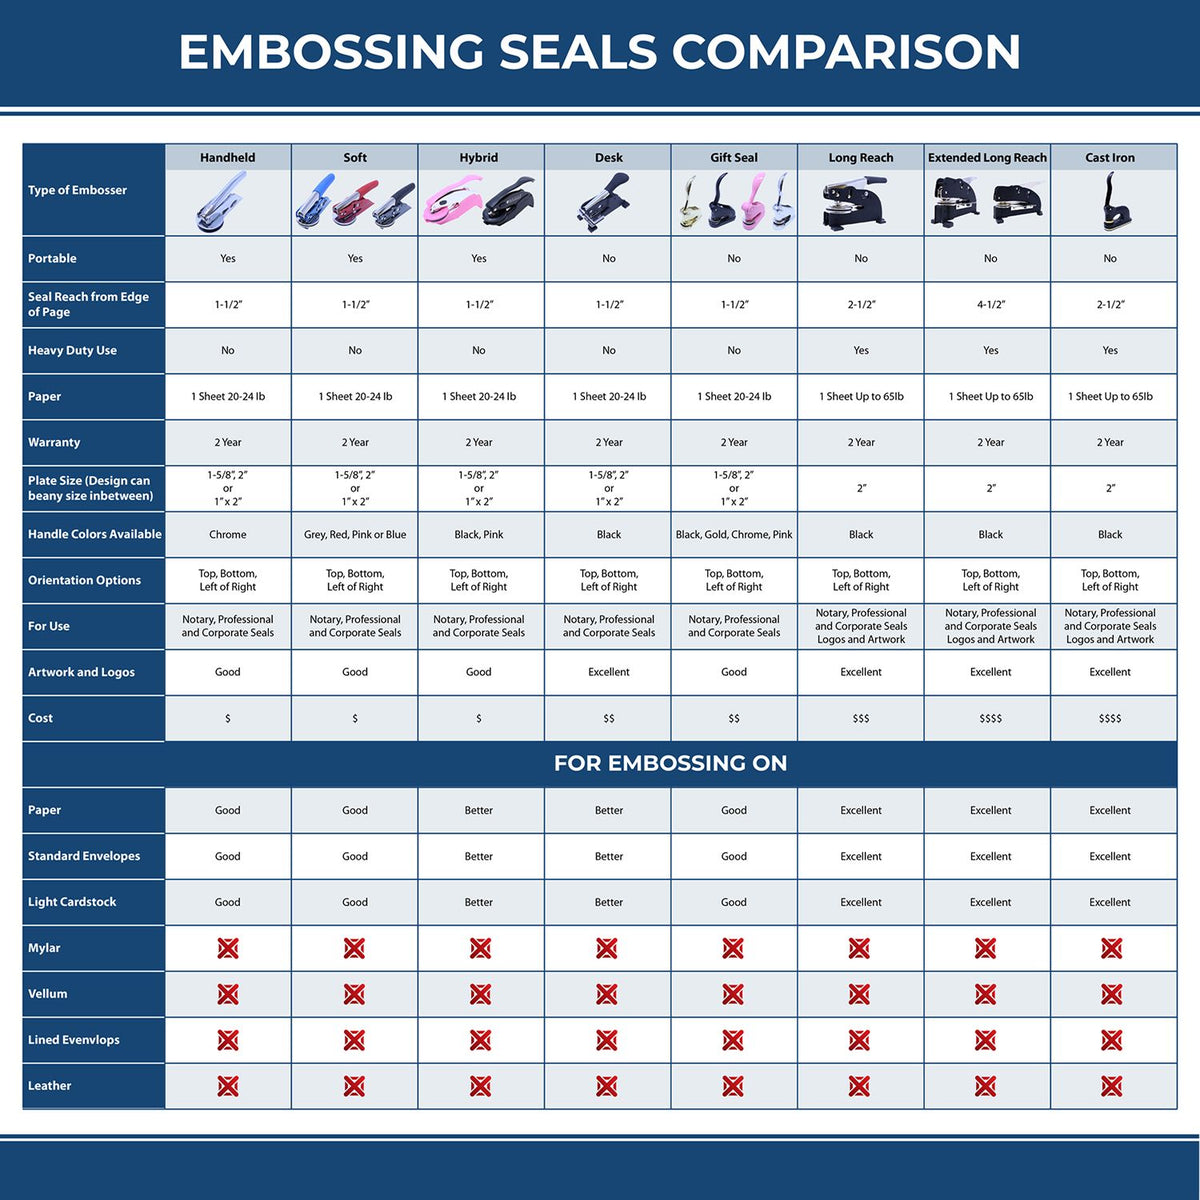 A comparison chart for the different types of mount models available for the Soft North Dakota Professional Engineer Seal.